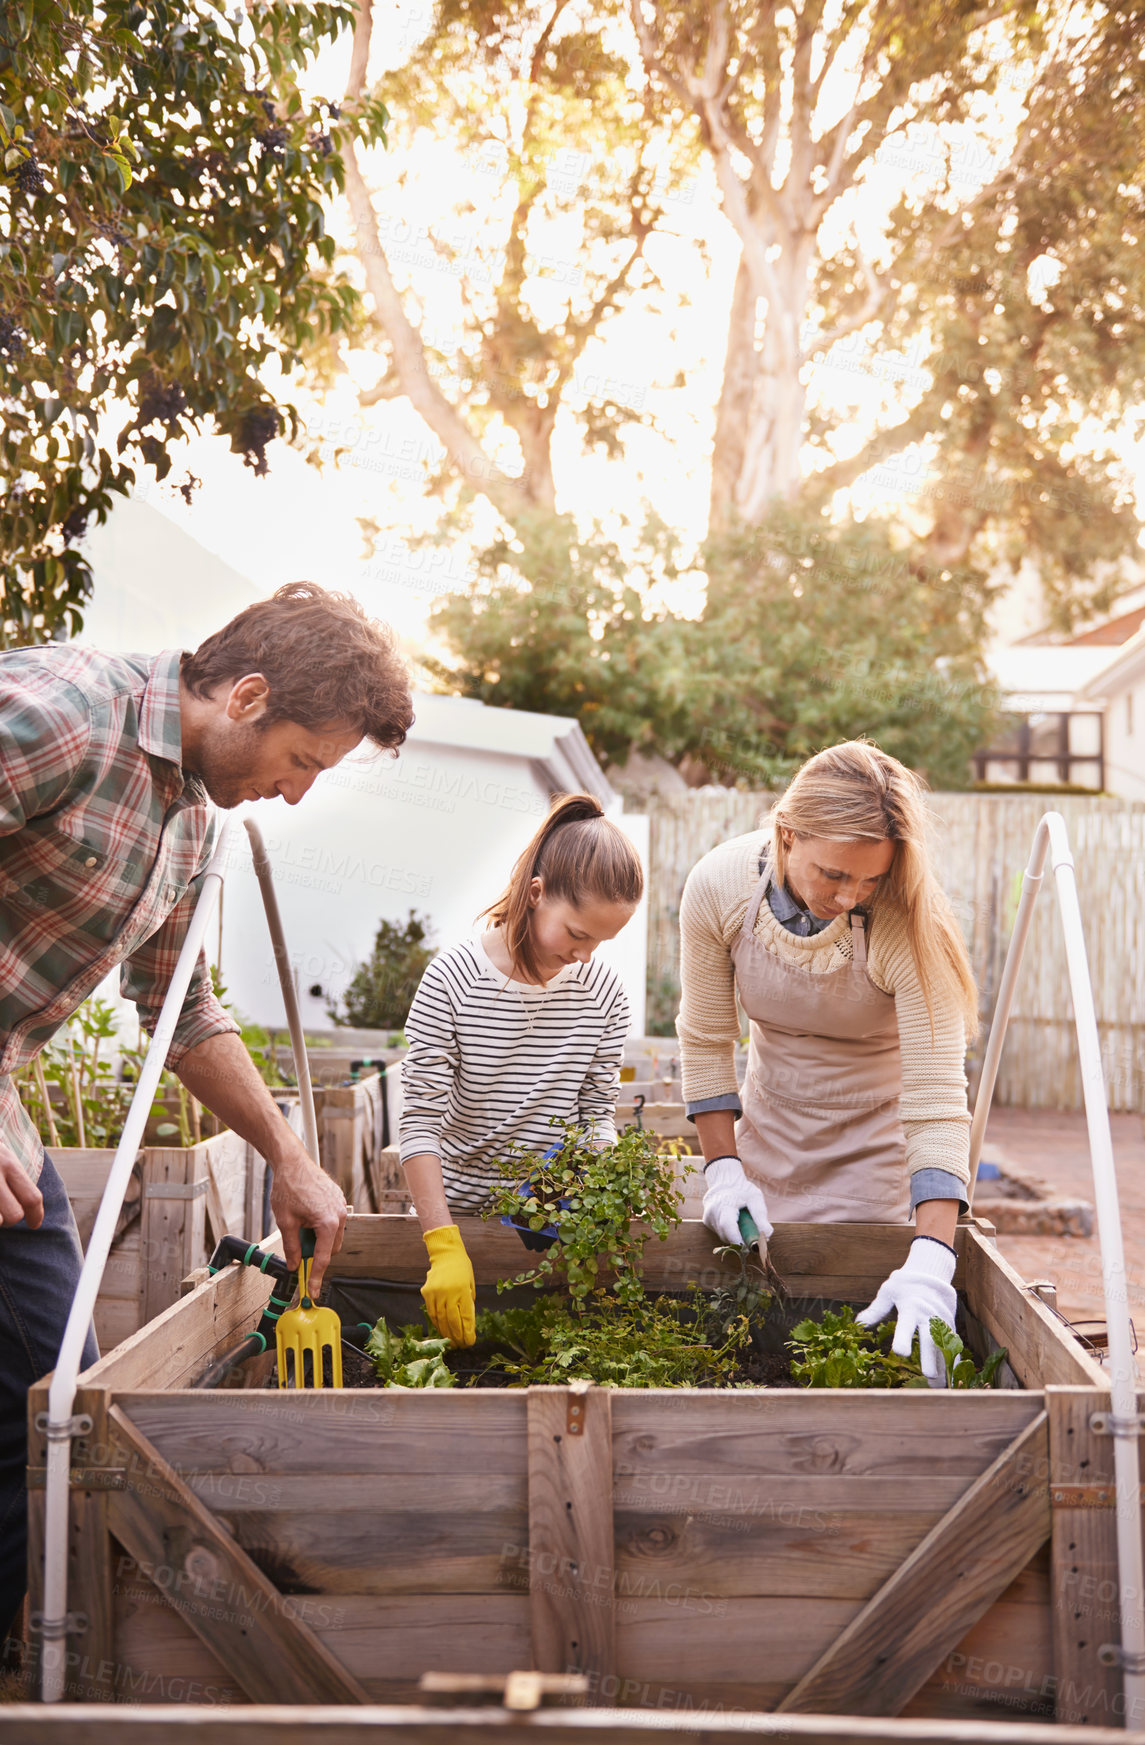 Buy stock photo Shot of a family gardening together in their backyard